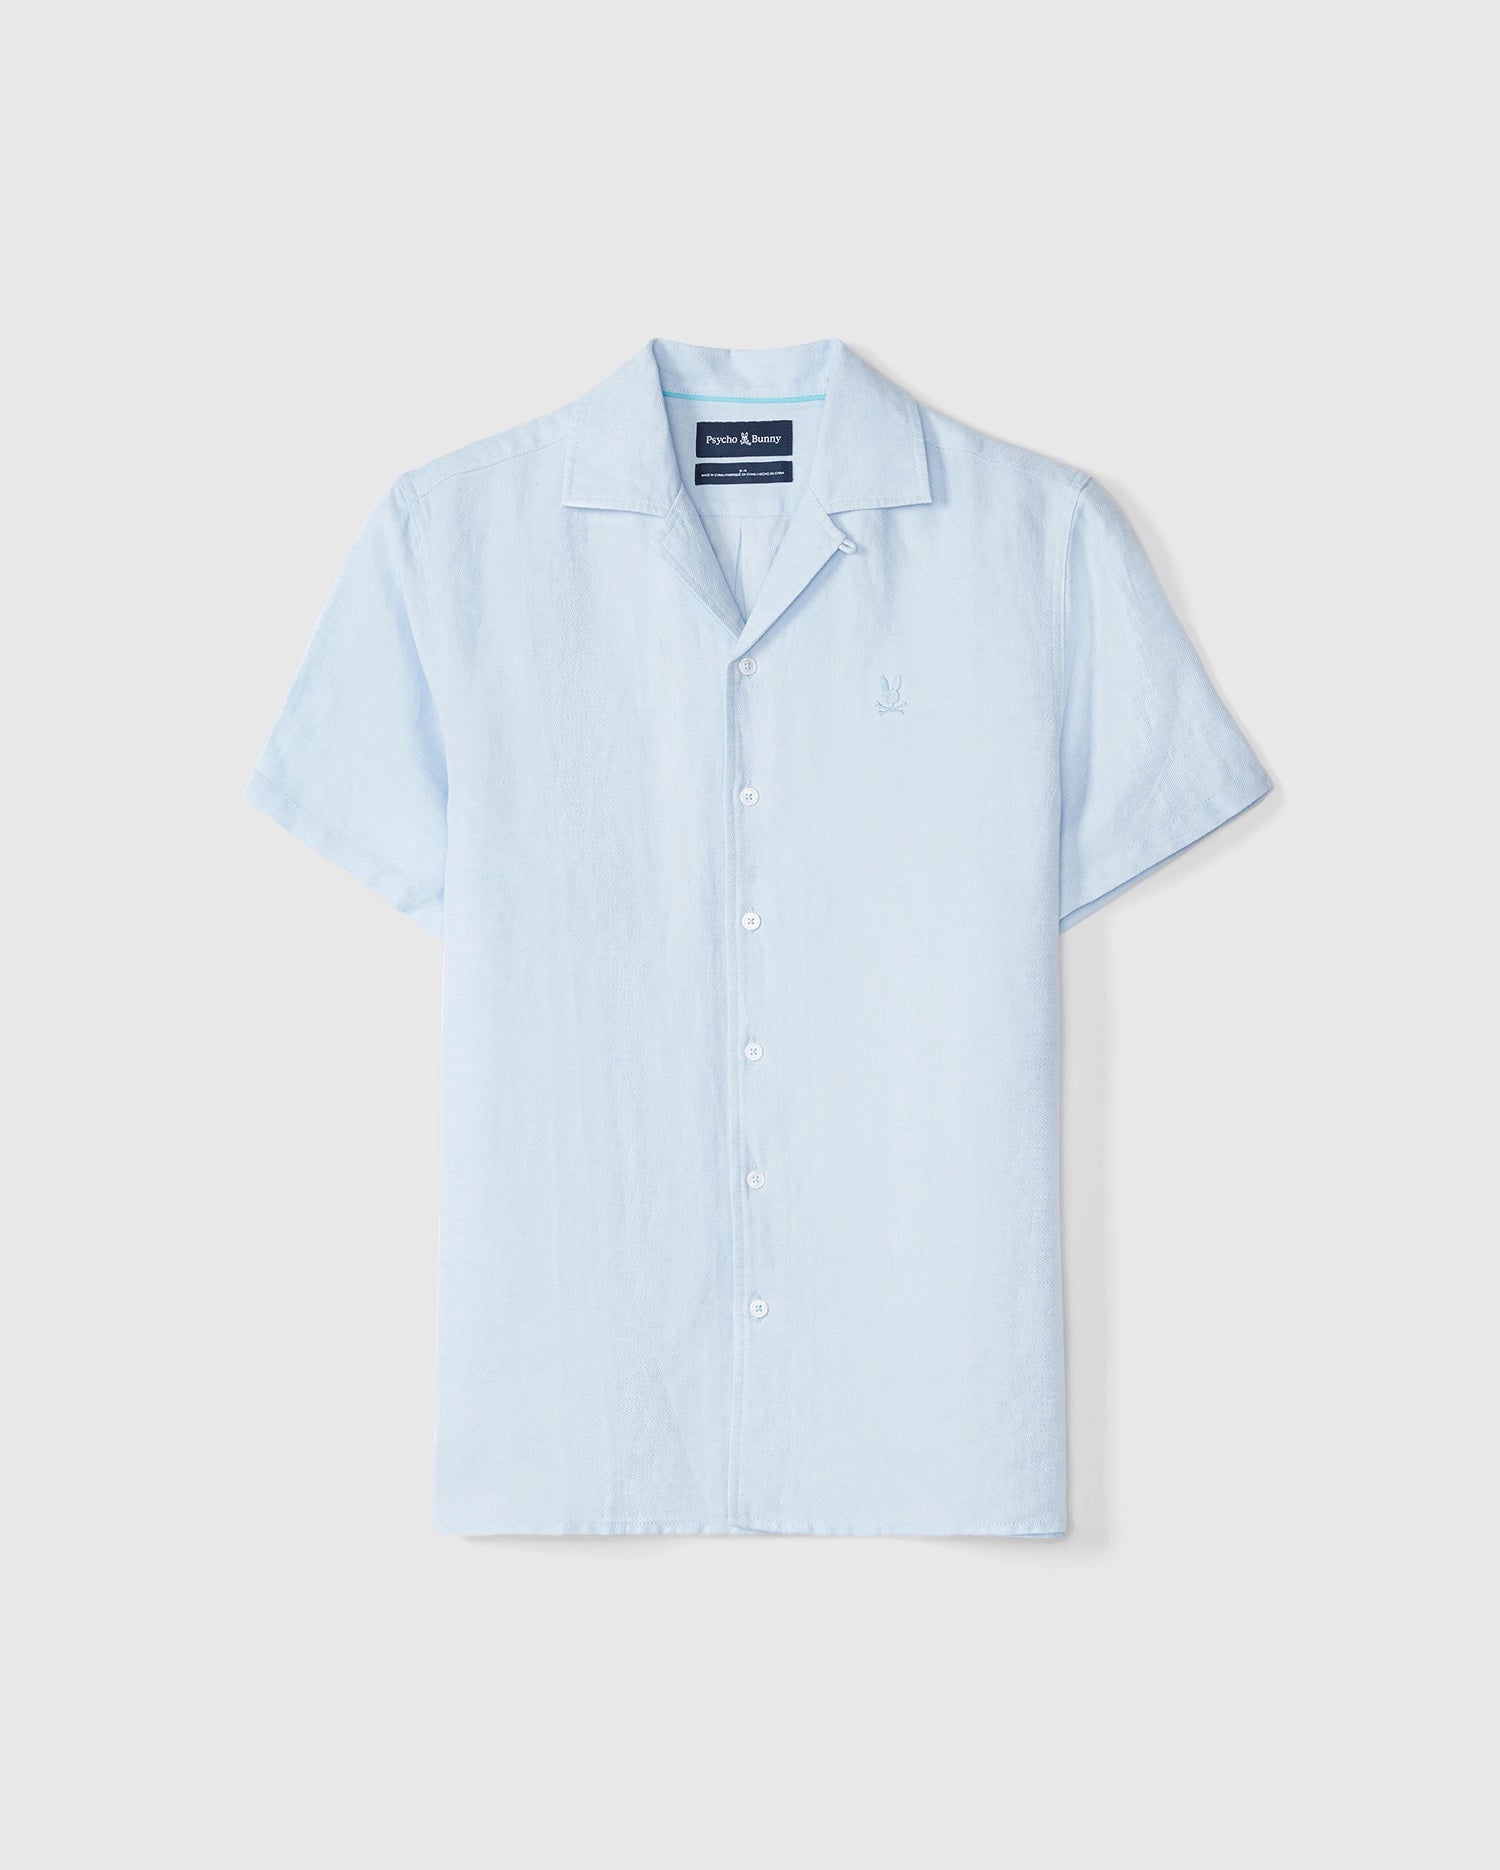 A light blue Psycho Bunny MENS WINDCREST LINEN SHORT SLEEVE SHIRT - B6Q148C200 is displayed against a plain white background. It features a small, subtle embroidered logo on the left chest area and a navy tag at the inside collar.